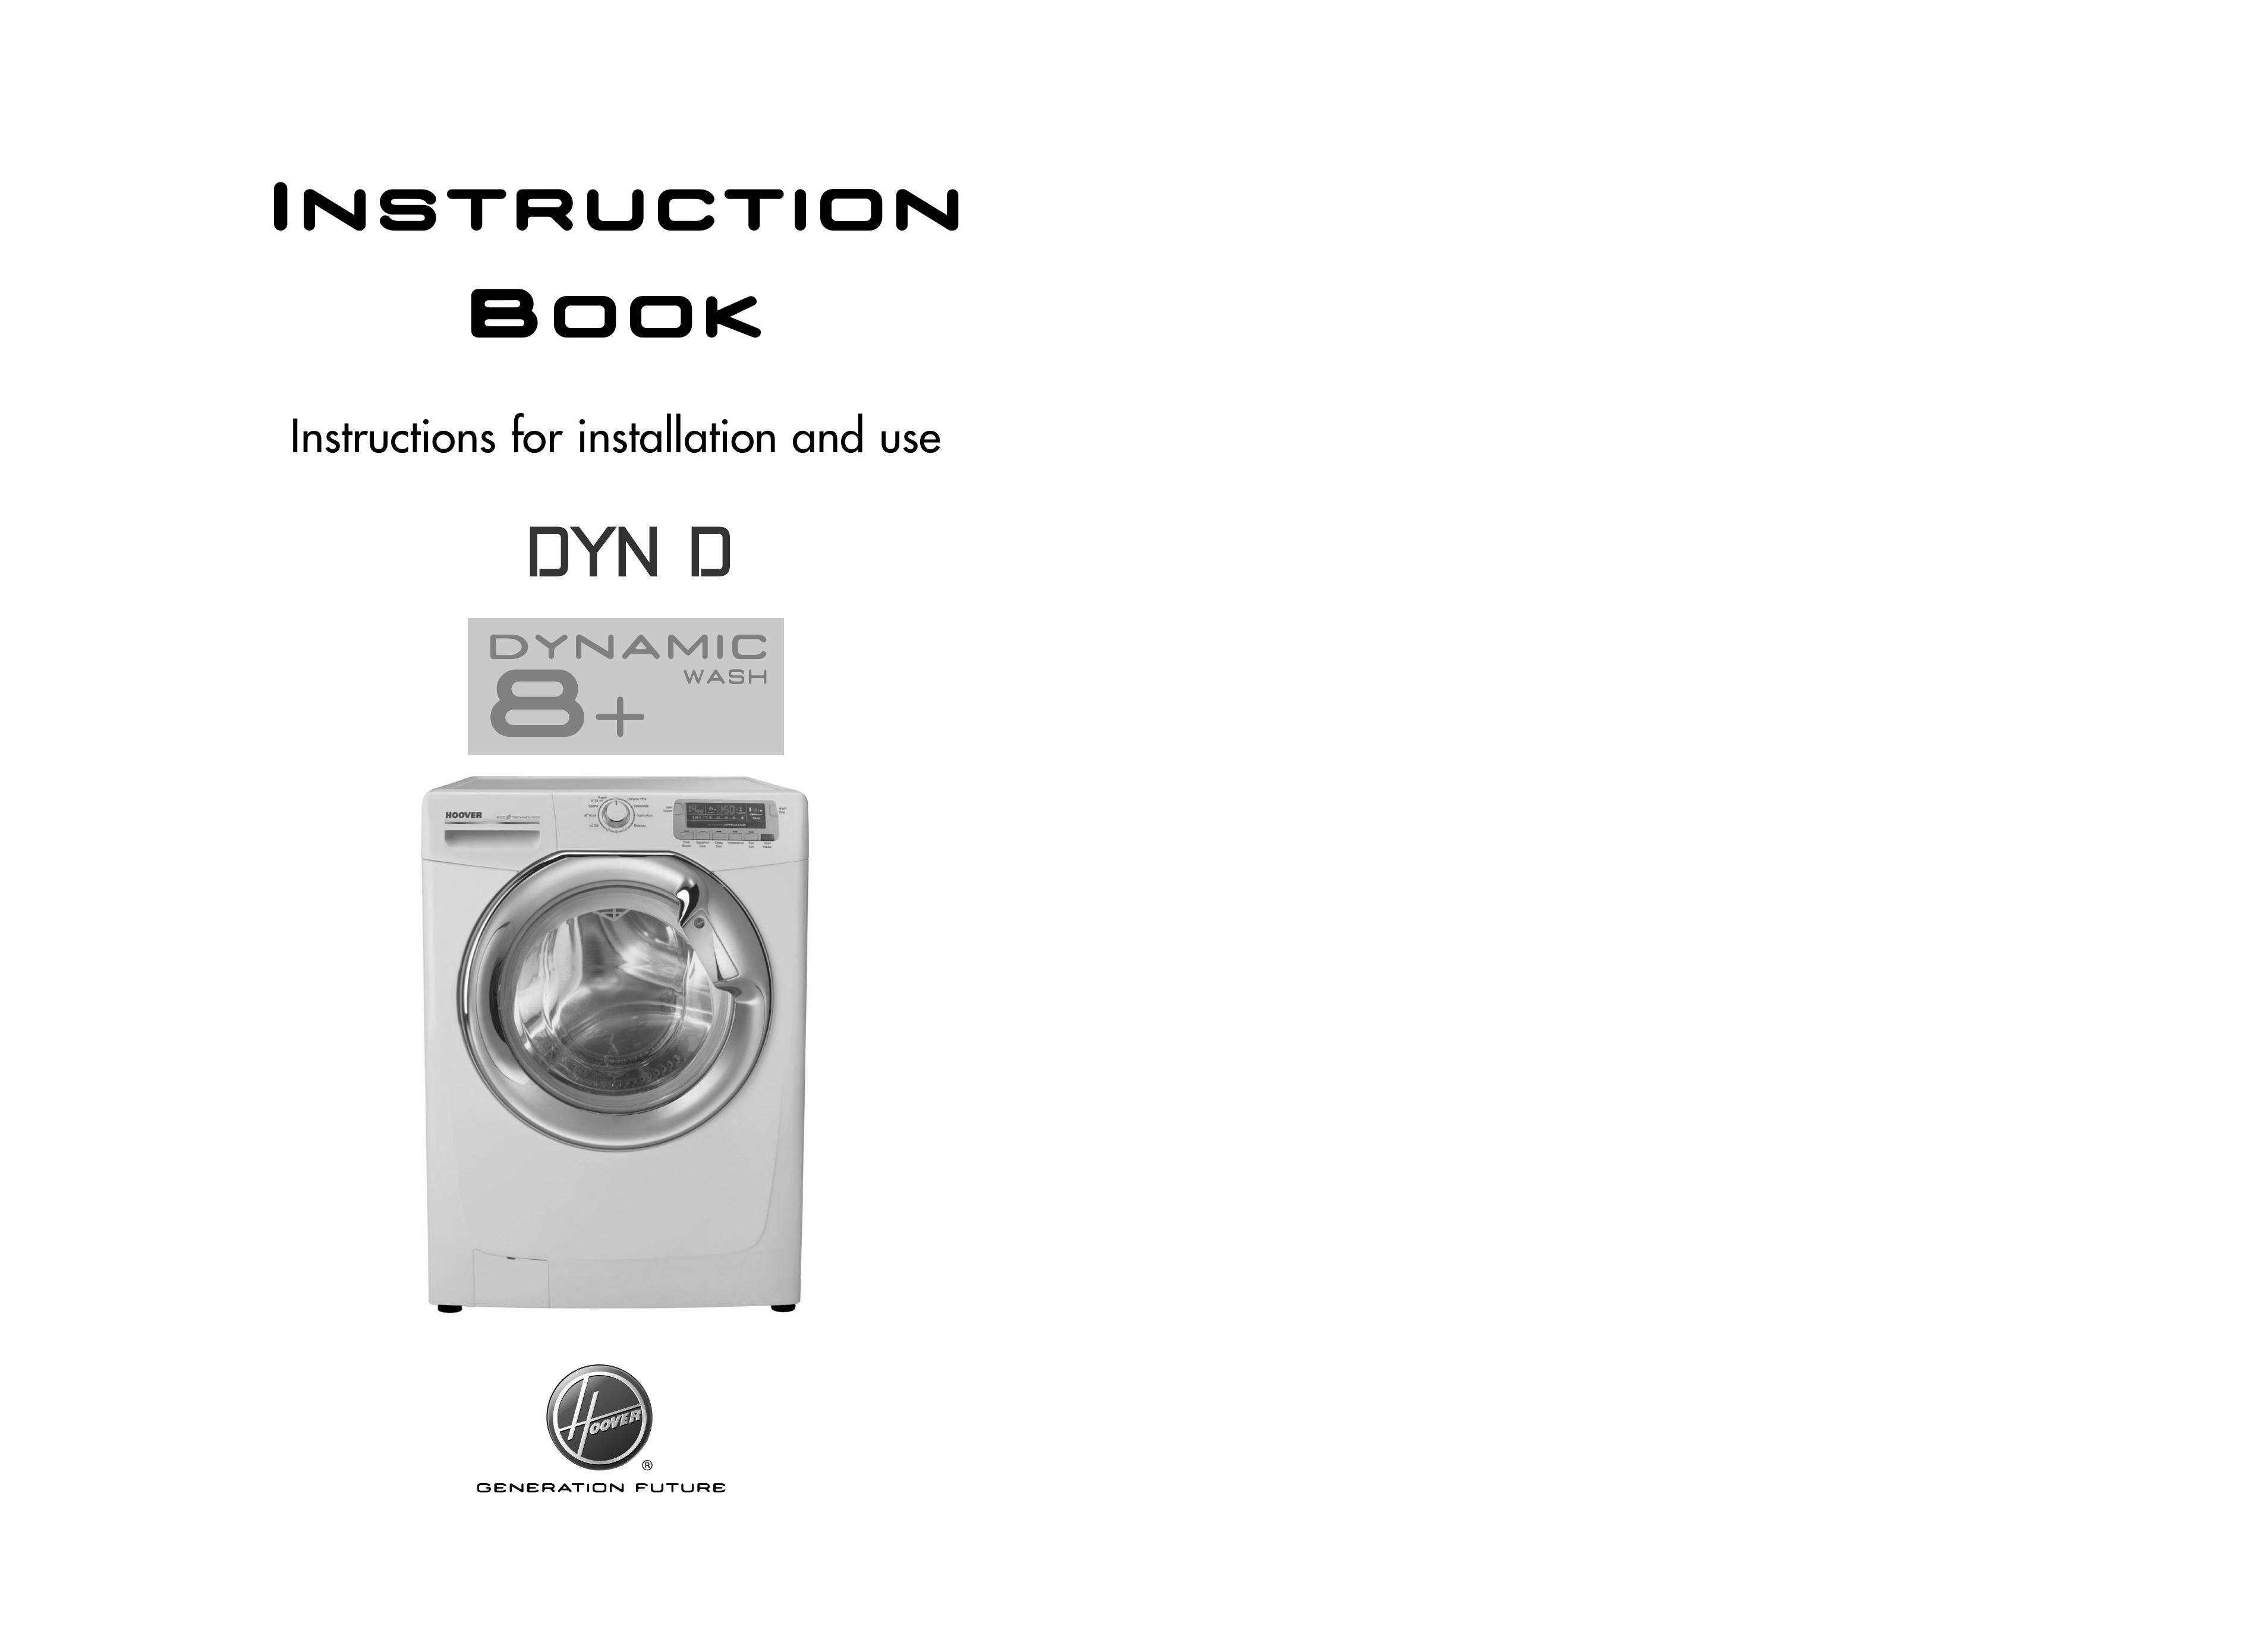 Hoover DYN D Washer User Manual